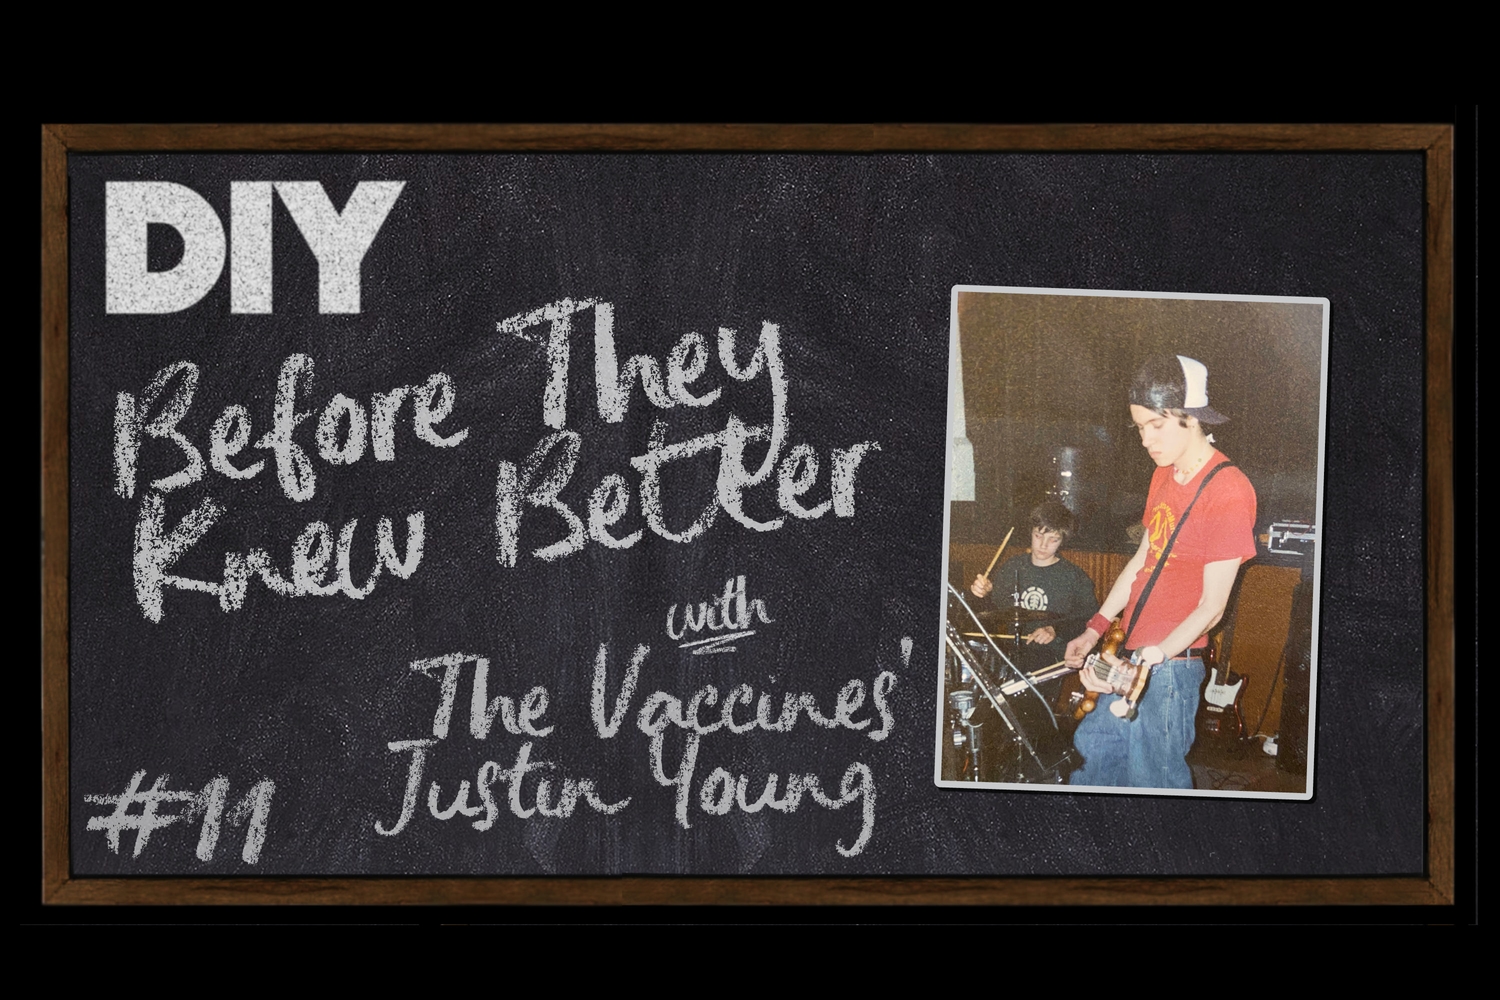 Before They Knew Better rounds off the year chatting to The Vaccines’ Justin Young